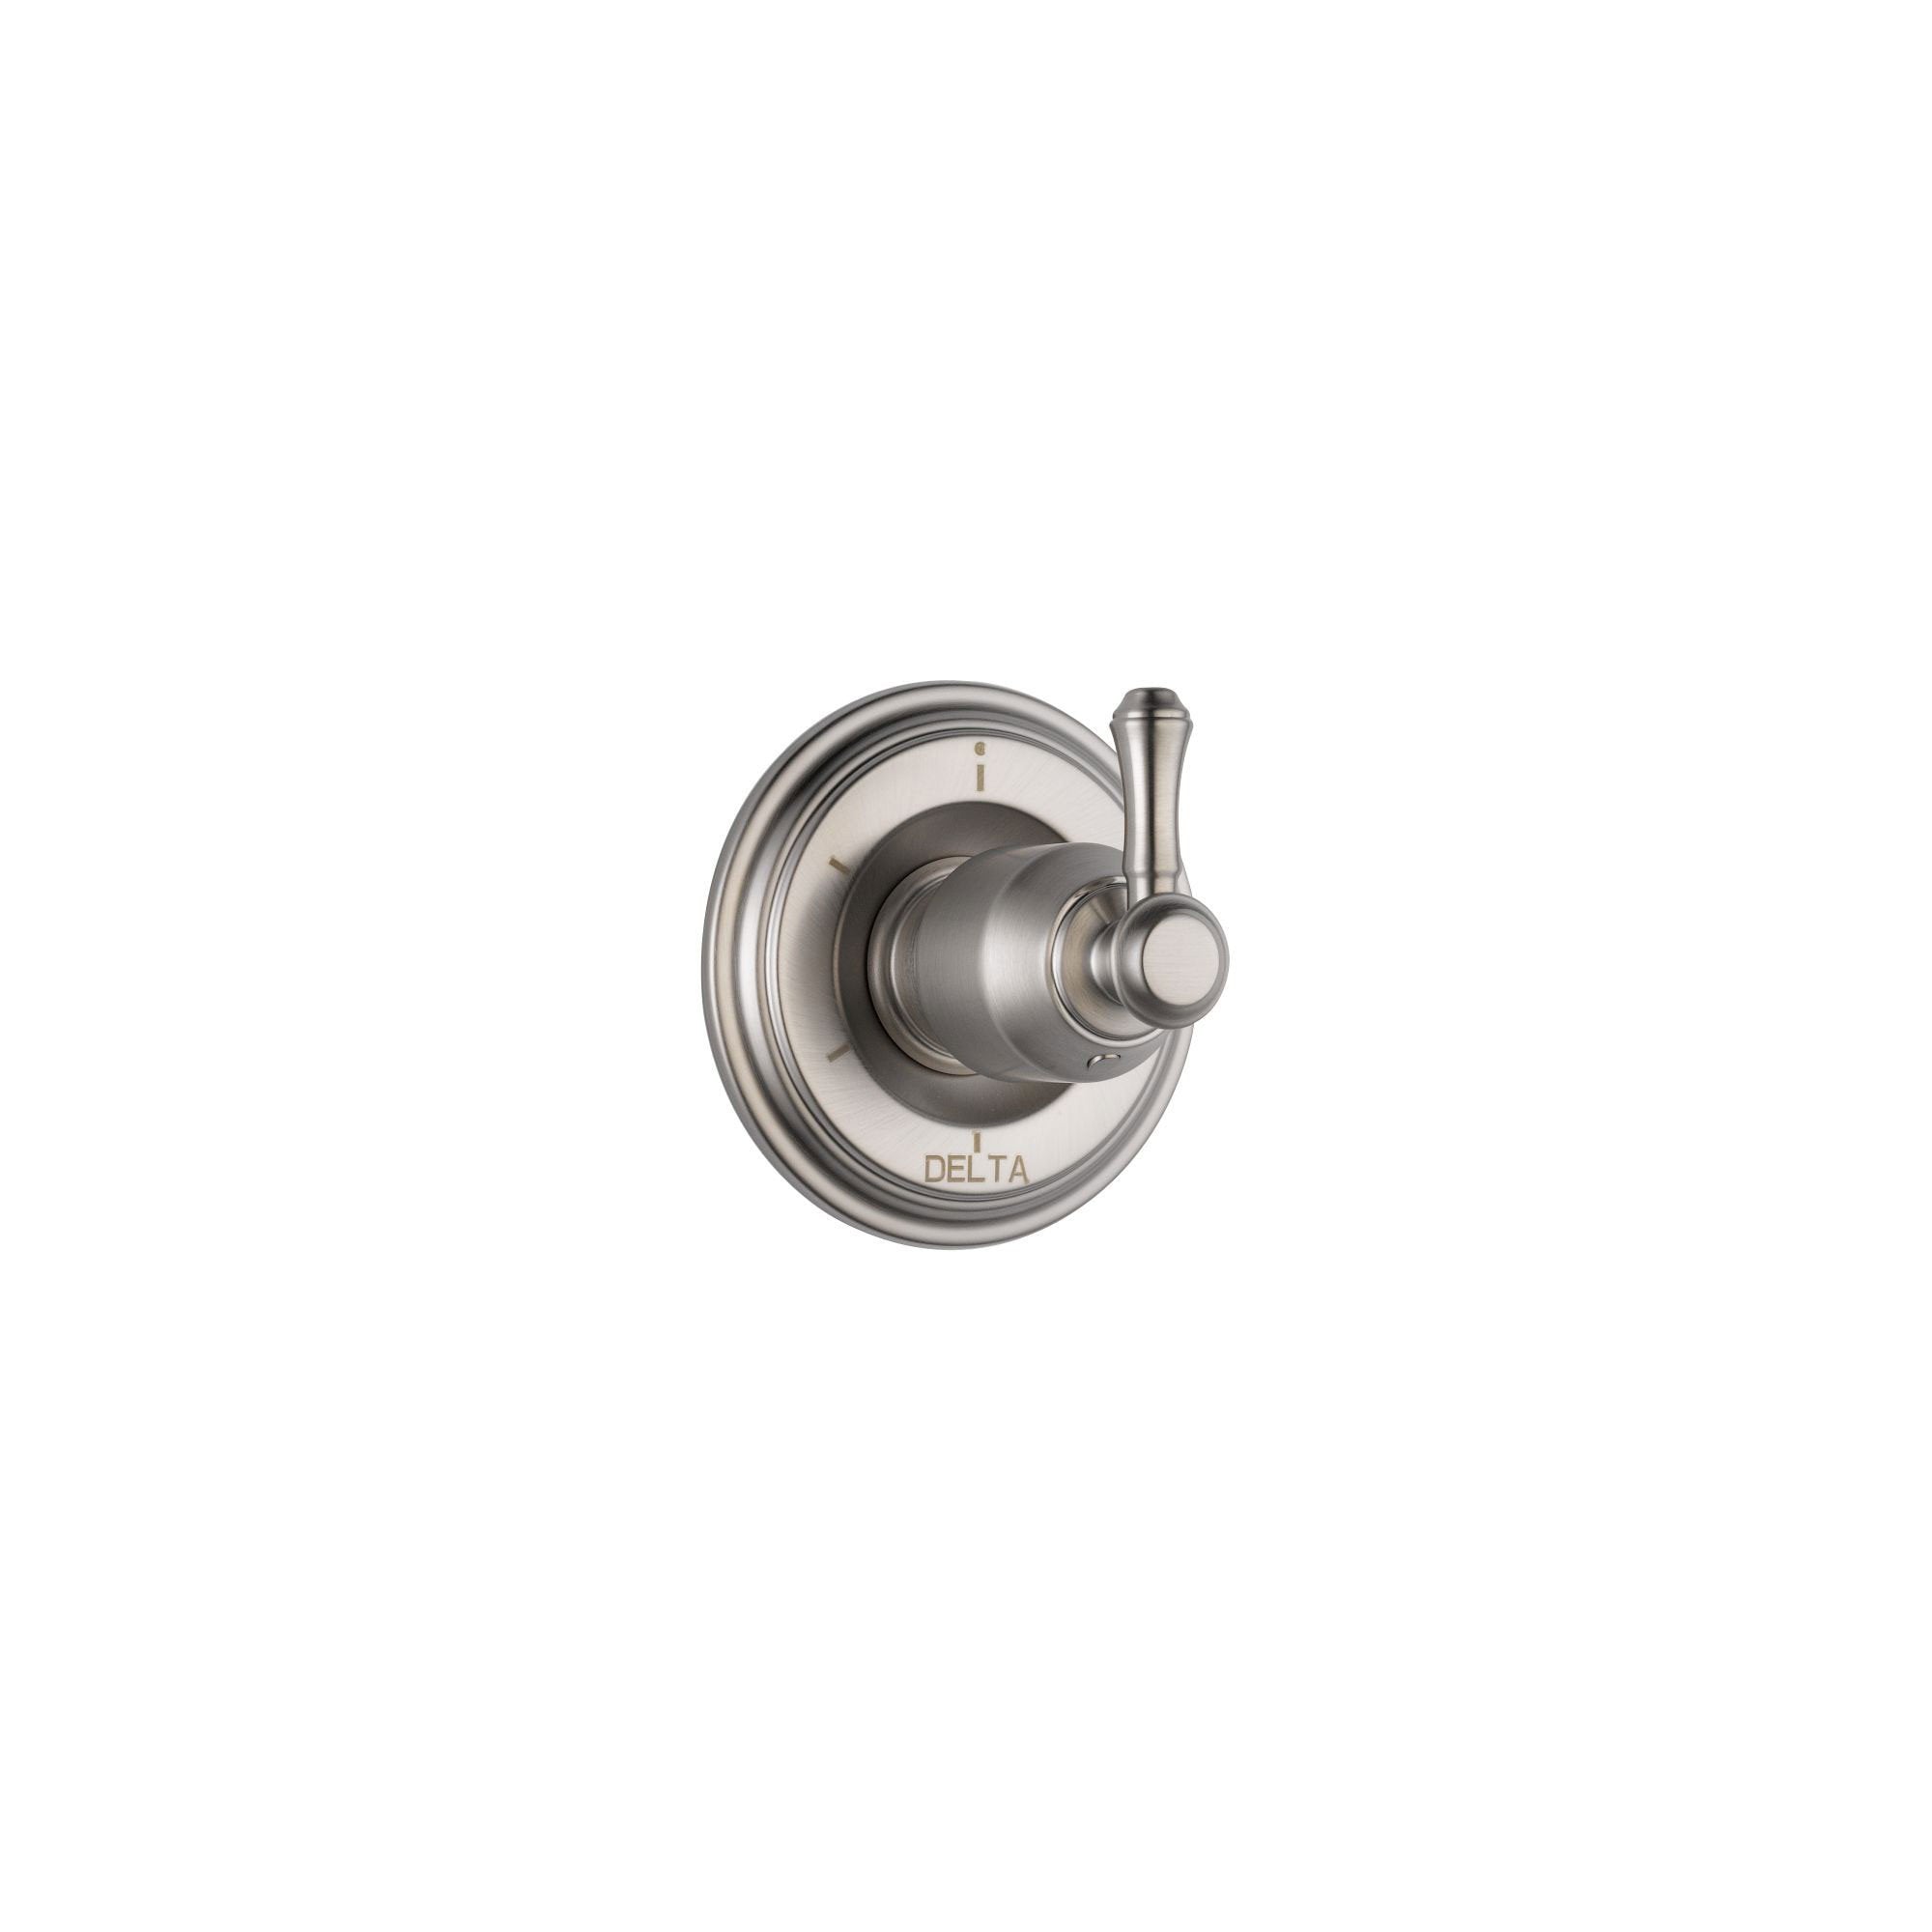 Delta Cassidy Stainless Steel Finish 6-Setting 3-Port Shower Diverter Fixture INCLUDES Rough-in Valve and Single Lever Handle D1284V